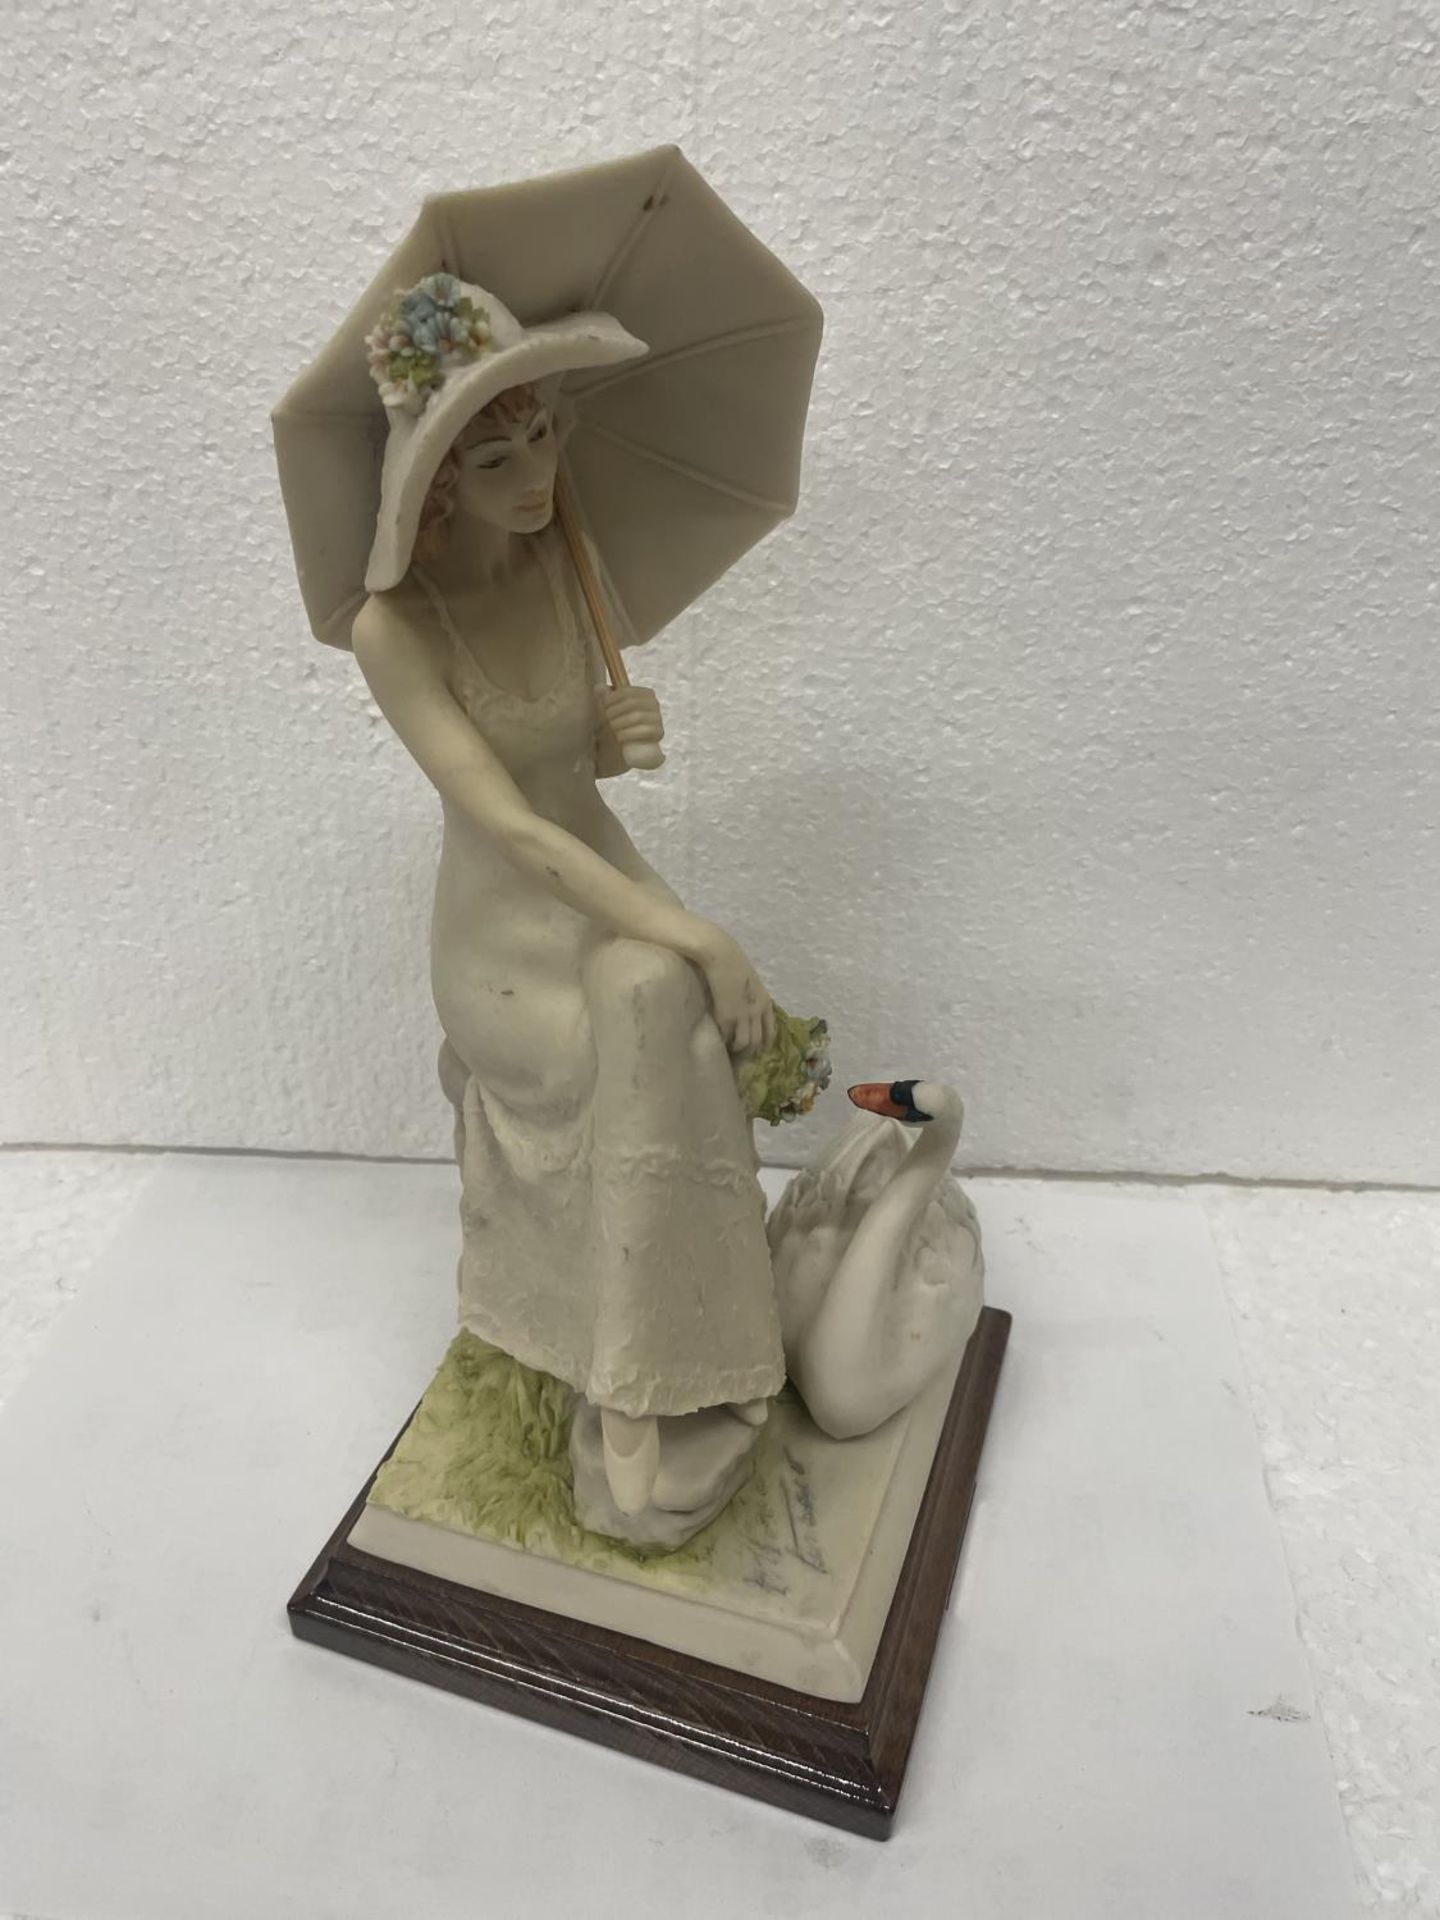 A VITTORIO TESSARO FIGURE OF A LADY AND A SWAN - Image 4 of 5